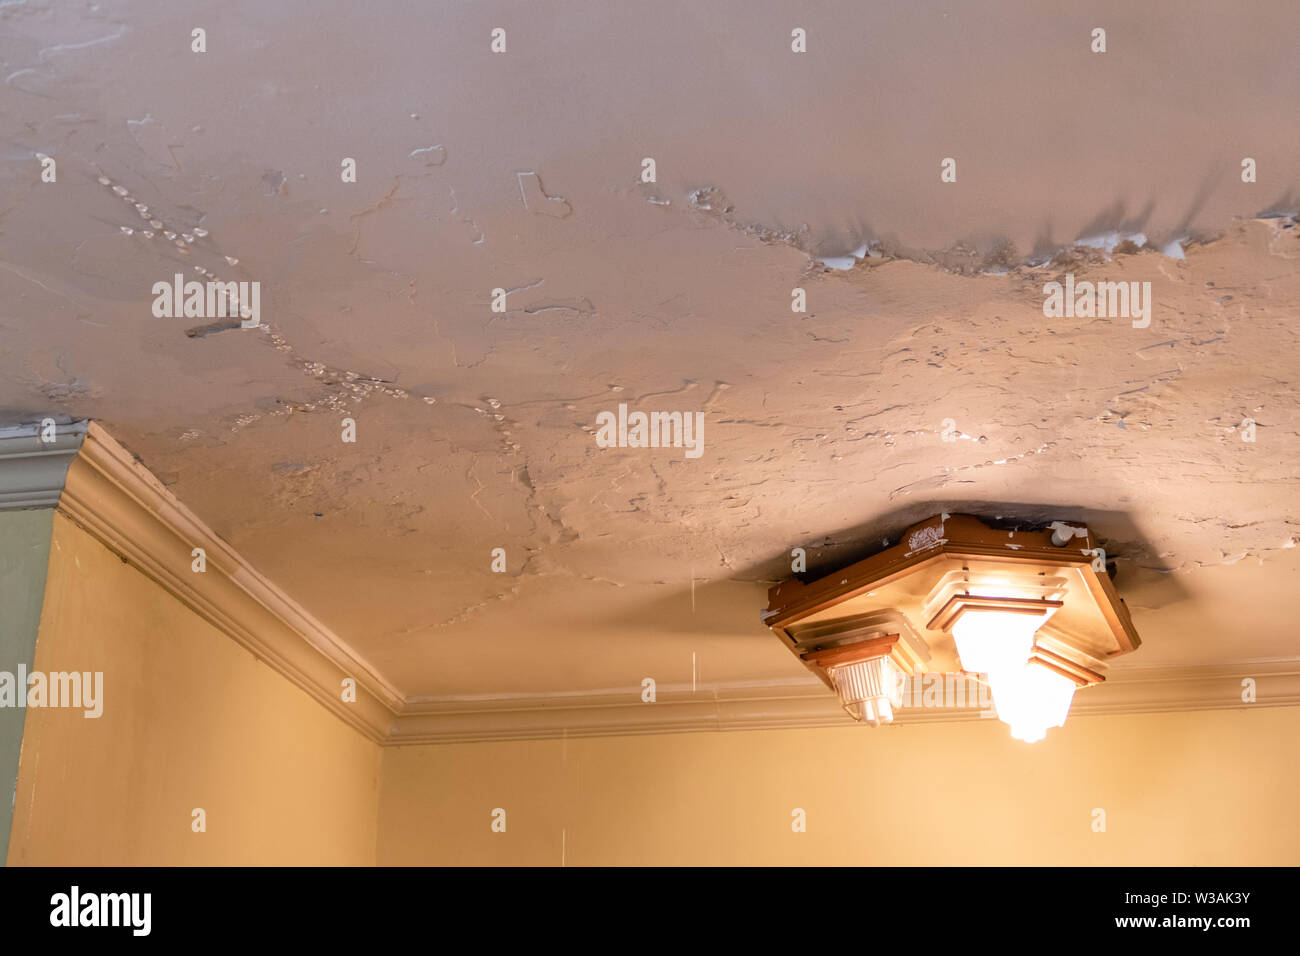 Water Dripping From Leaking Ceiling Water Damge Concept Stock